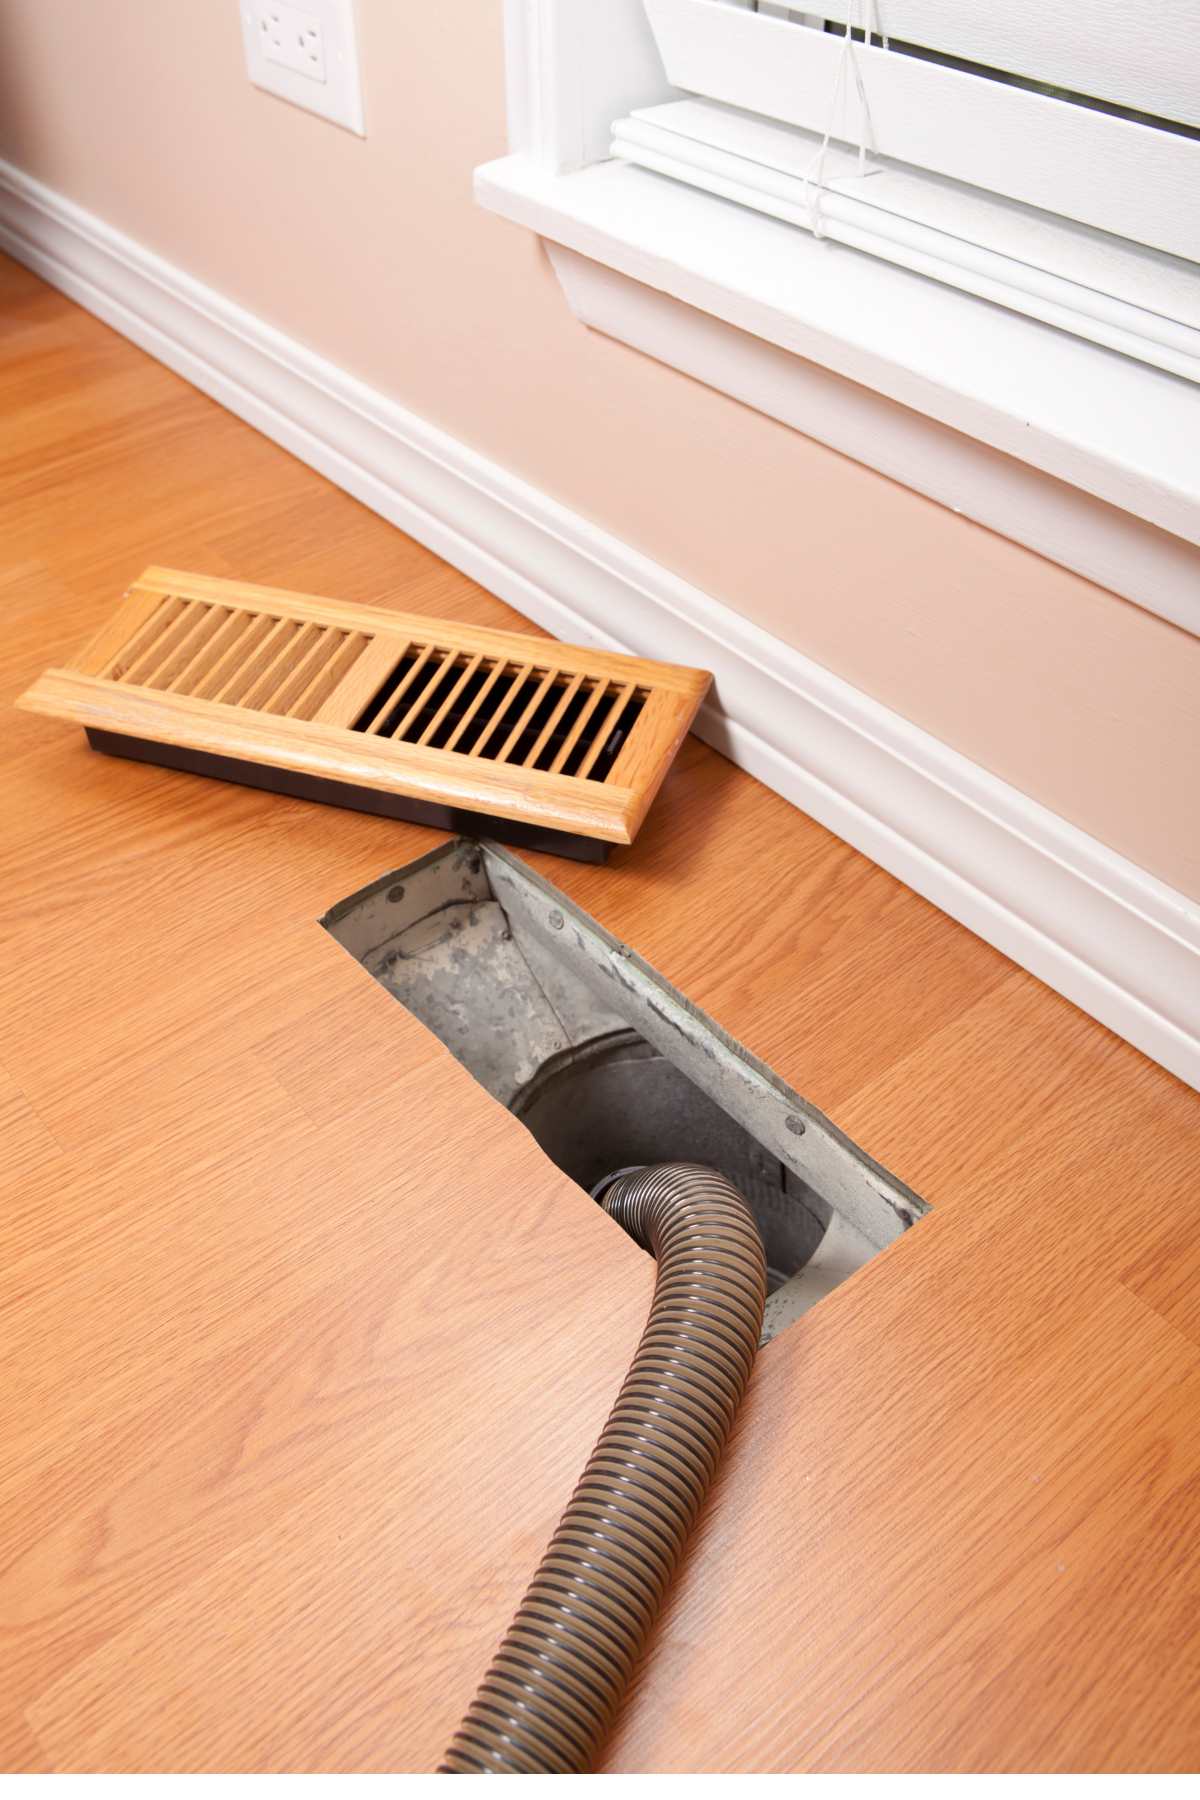 professional air ducts cleaning